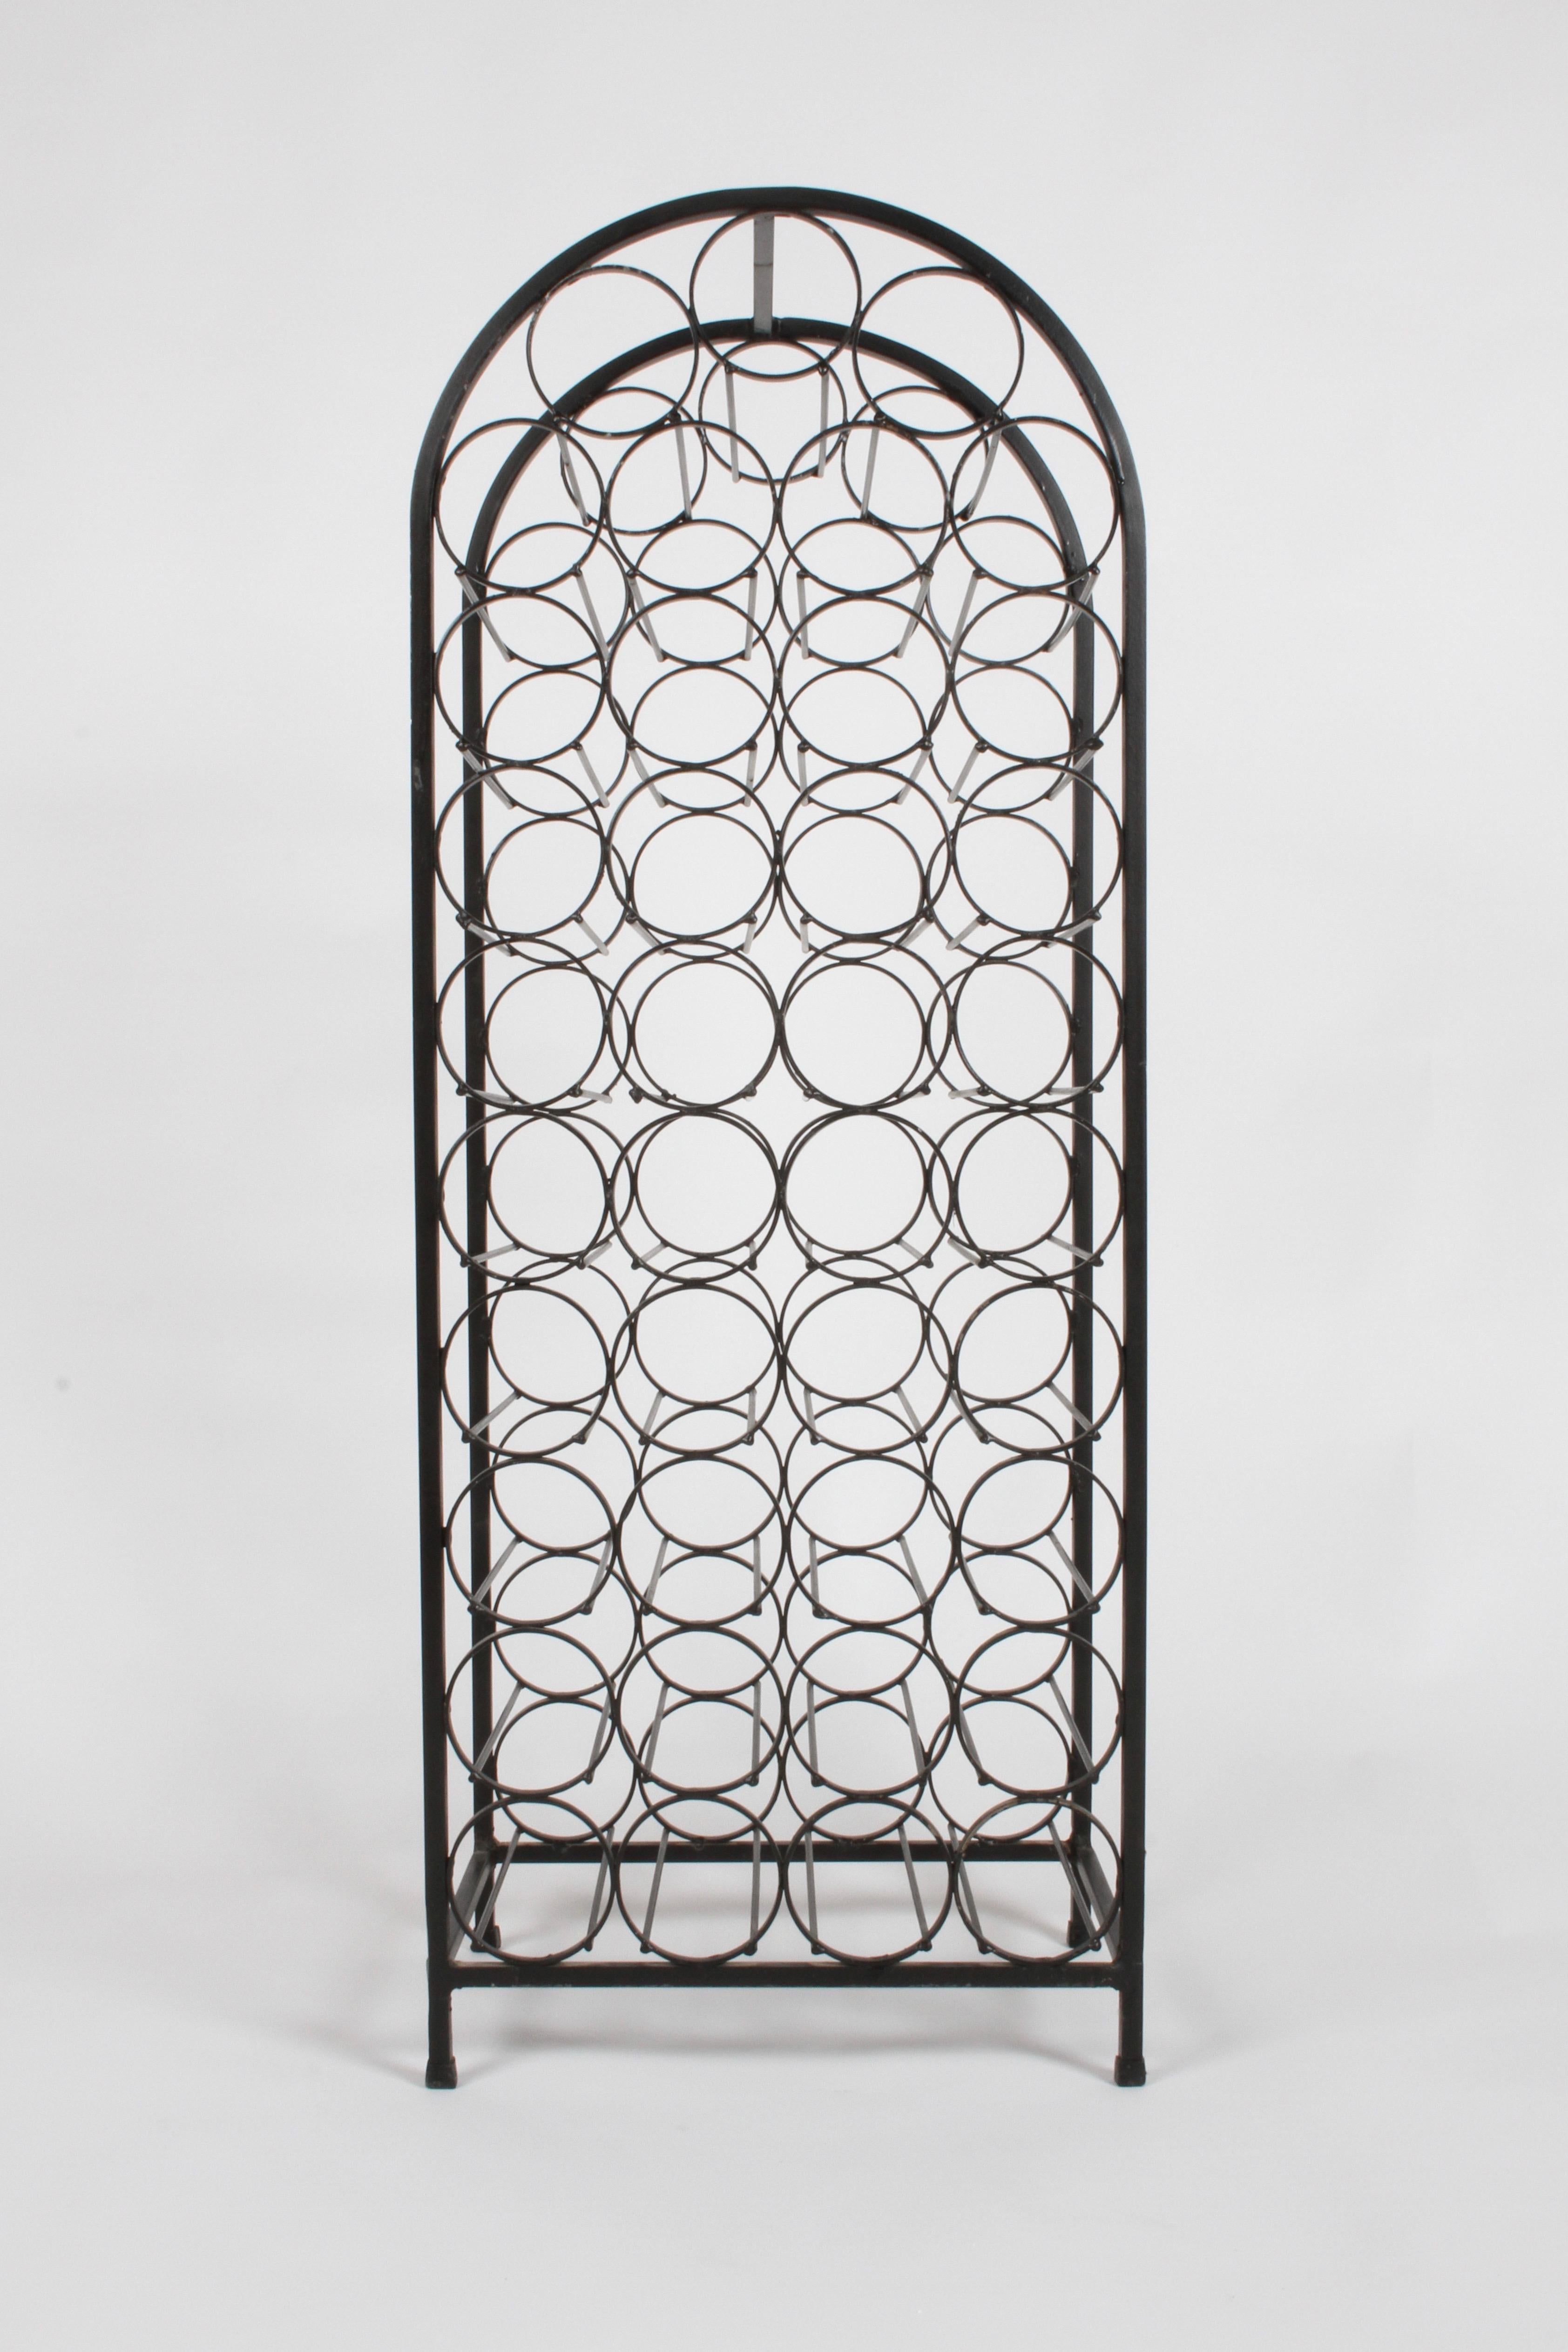 Mid-Century Modern Arthur Umanoff for Raymoor, black painted wrought iron free standing wine rack that holds
39 bottles. Minor wear to paint.